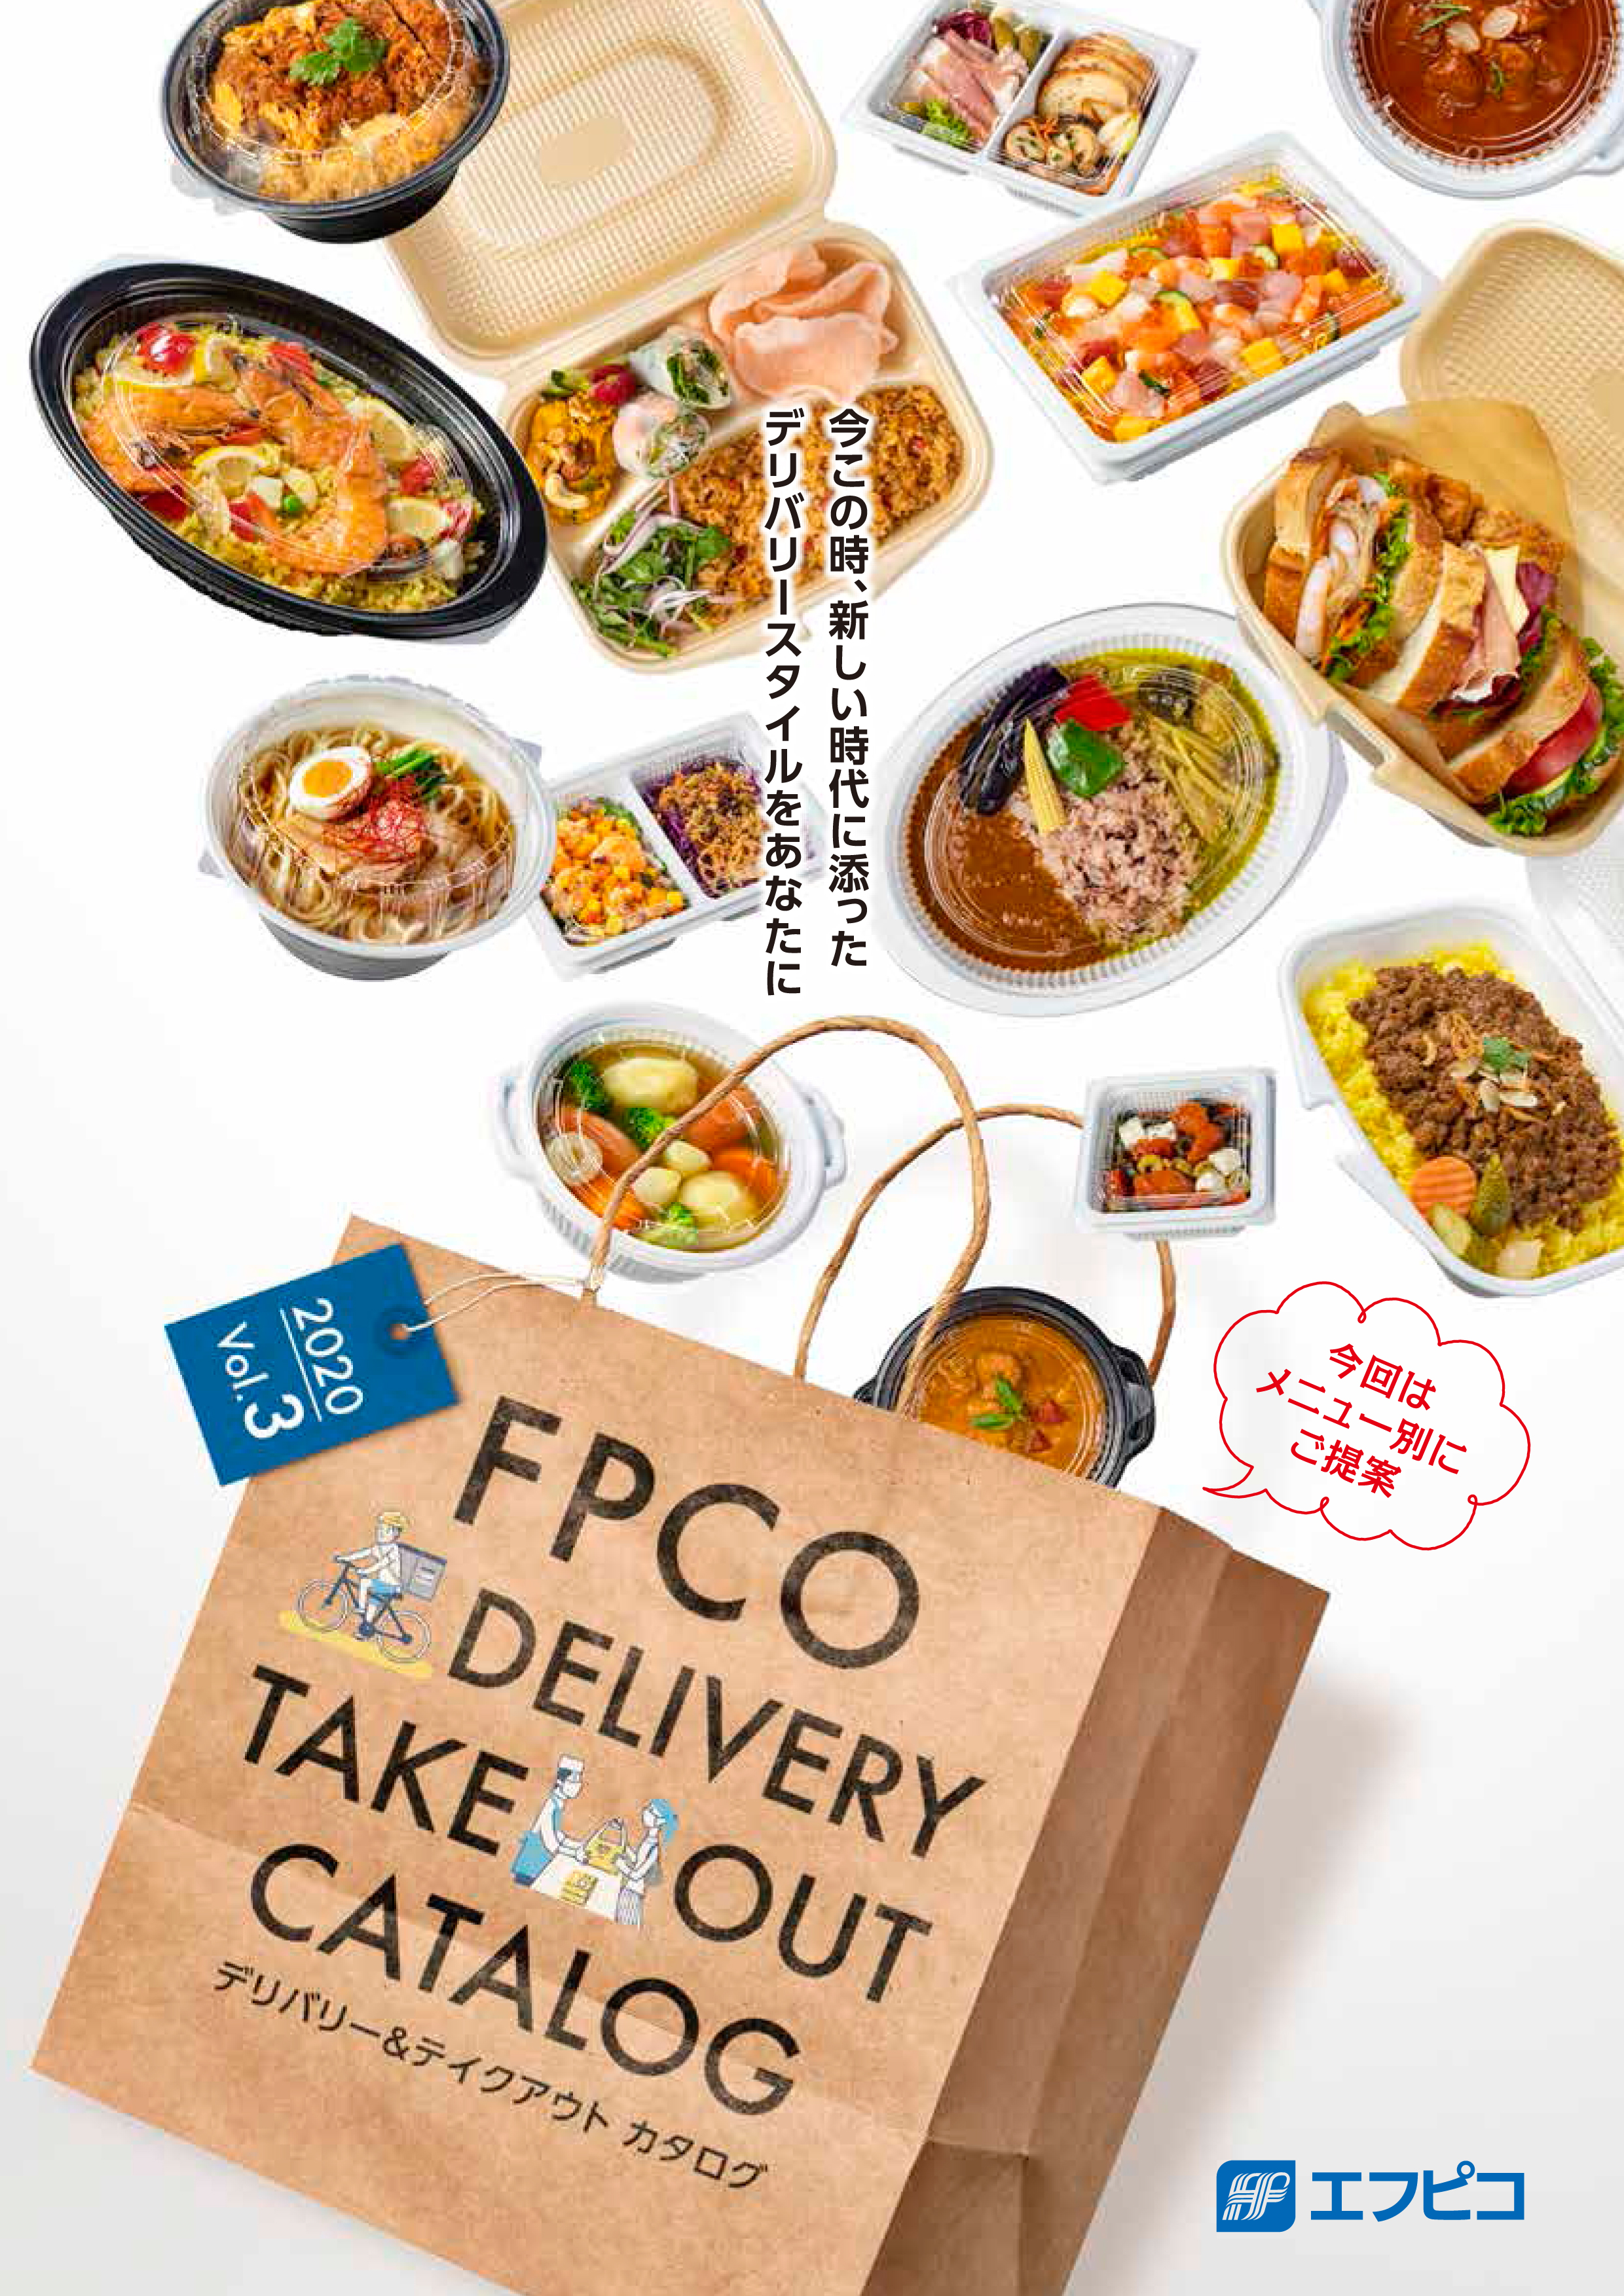 Delivery/To-Go Catalog Vol.3